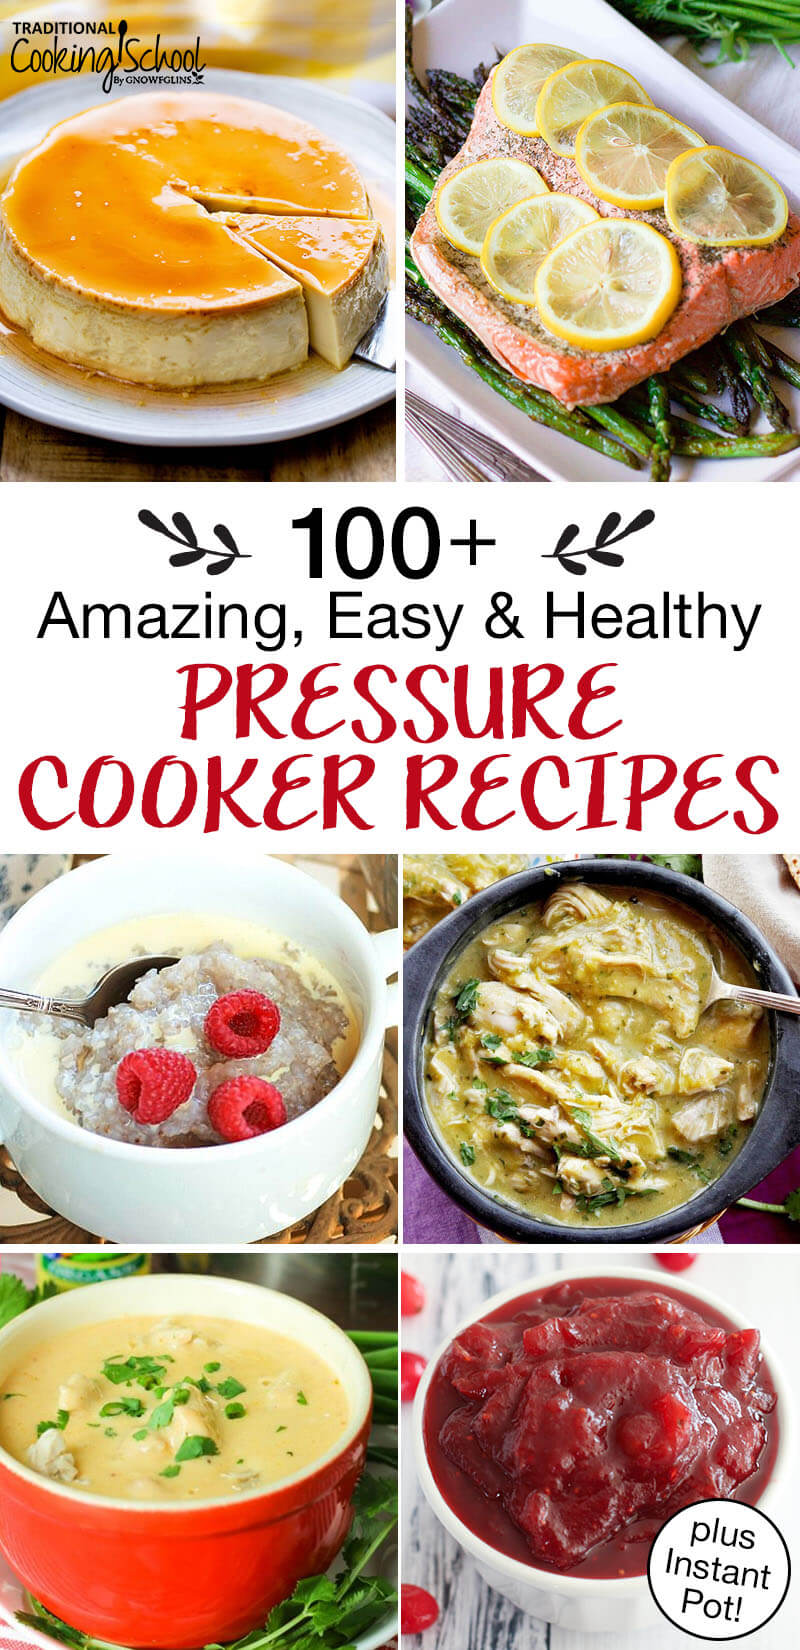 photo collage of lemon dill salmon, soup, cranberry sauce, buckwheat porridge, maple flan, and more, with text overlay: "100+ Amazing, Easy & Healthy Pressure Cooker Recipes (Instant Pot too!)"